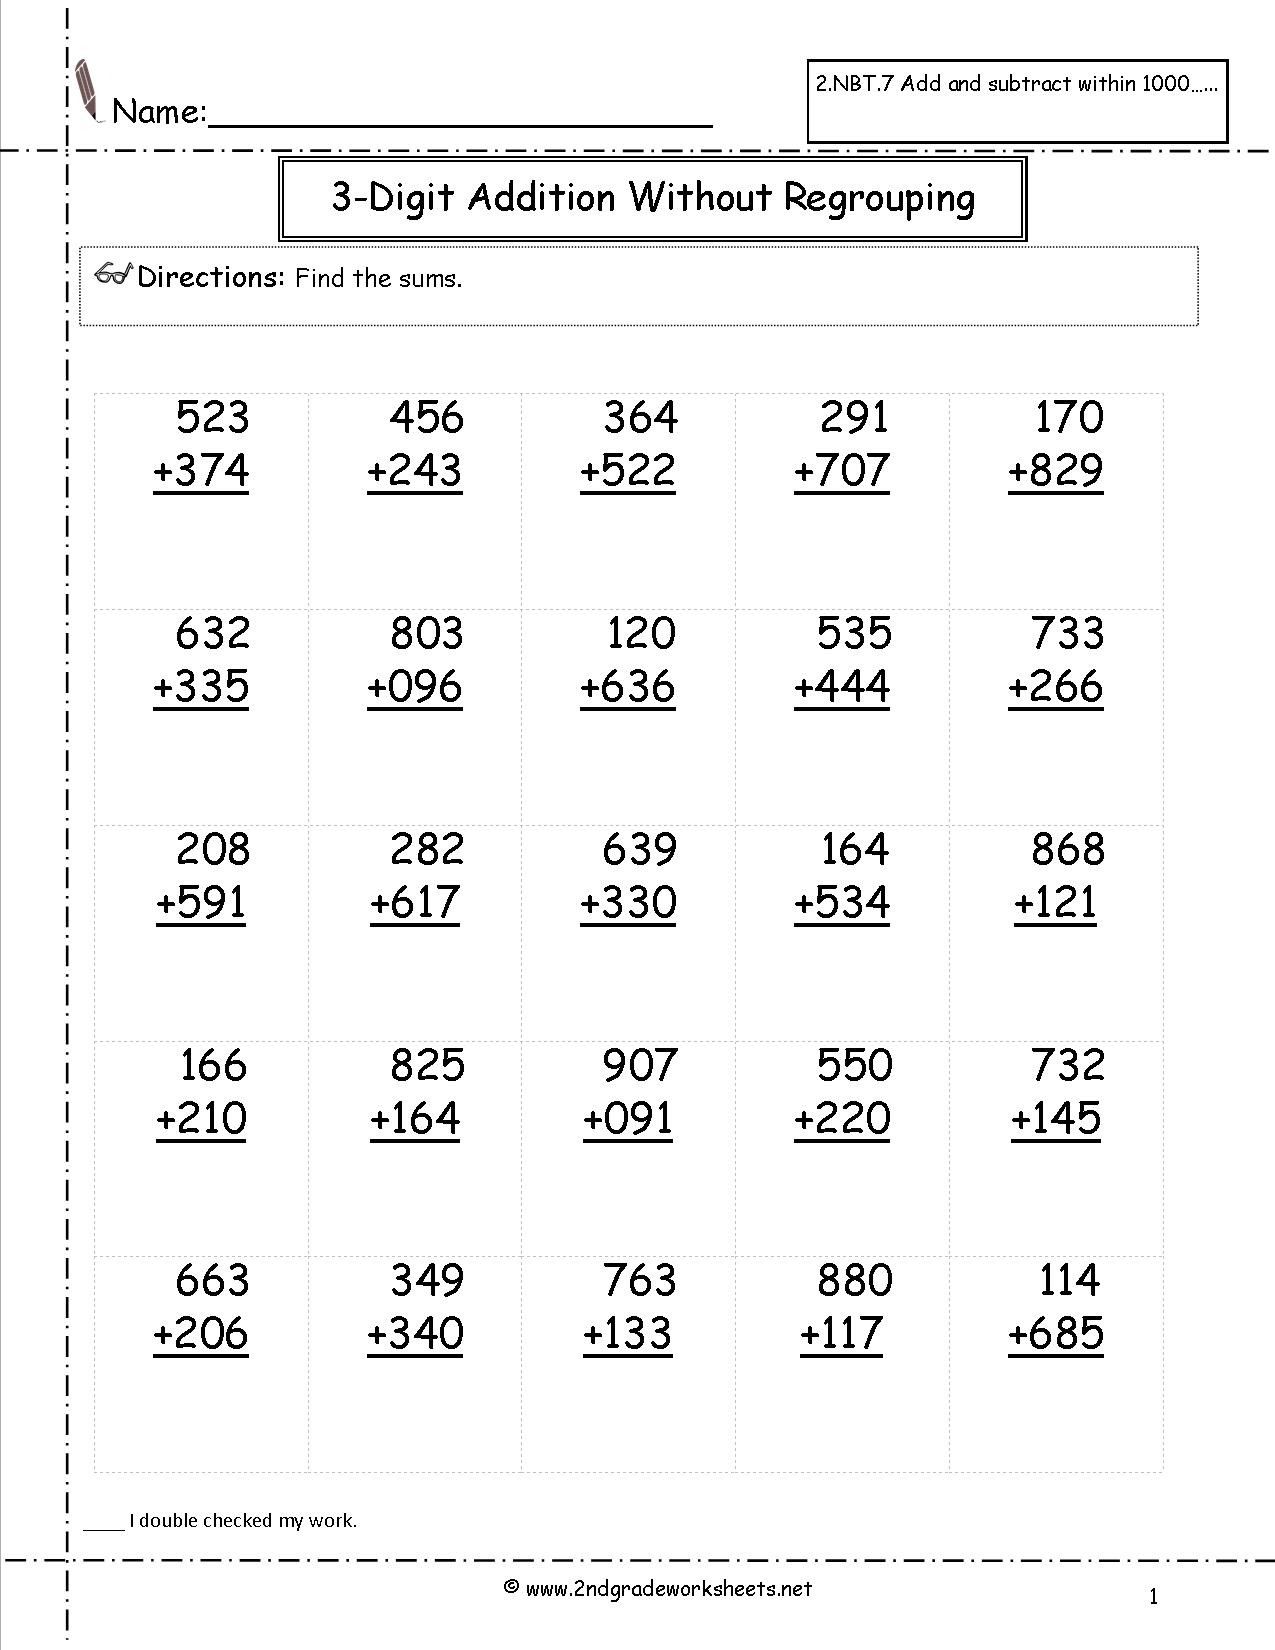 15 Best Images of Adding Hundreds Worksheets - Adding Two Digit Numbers